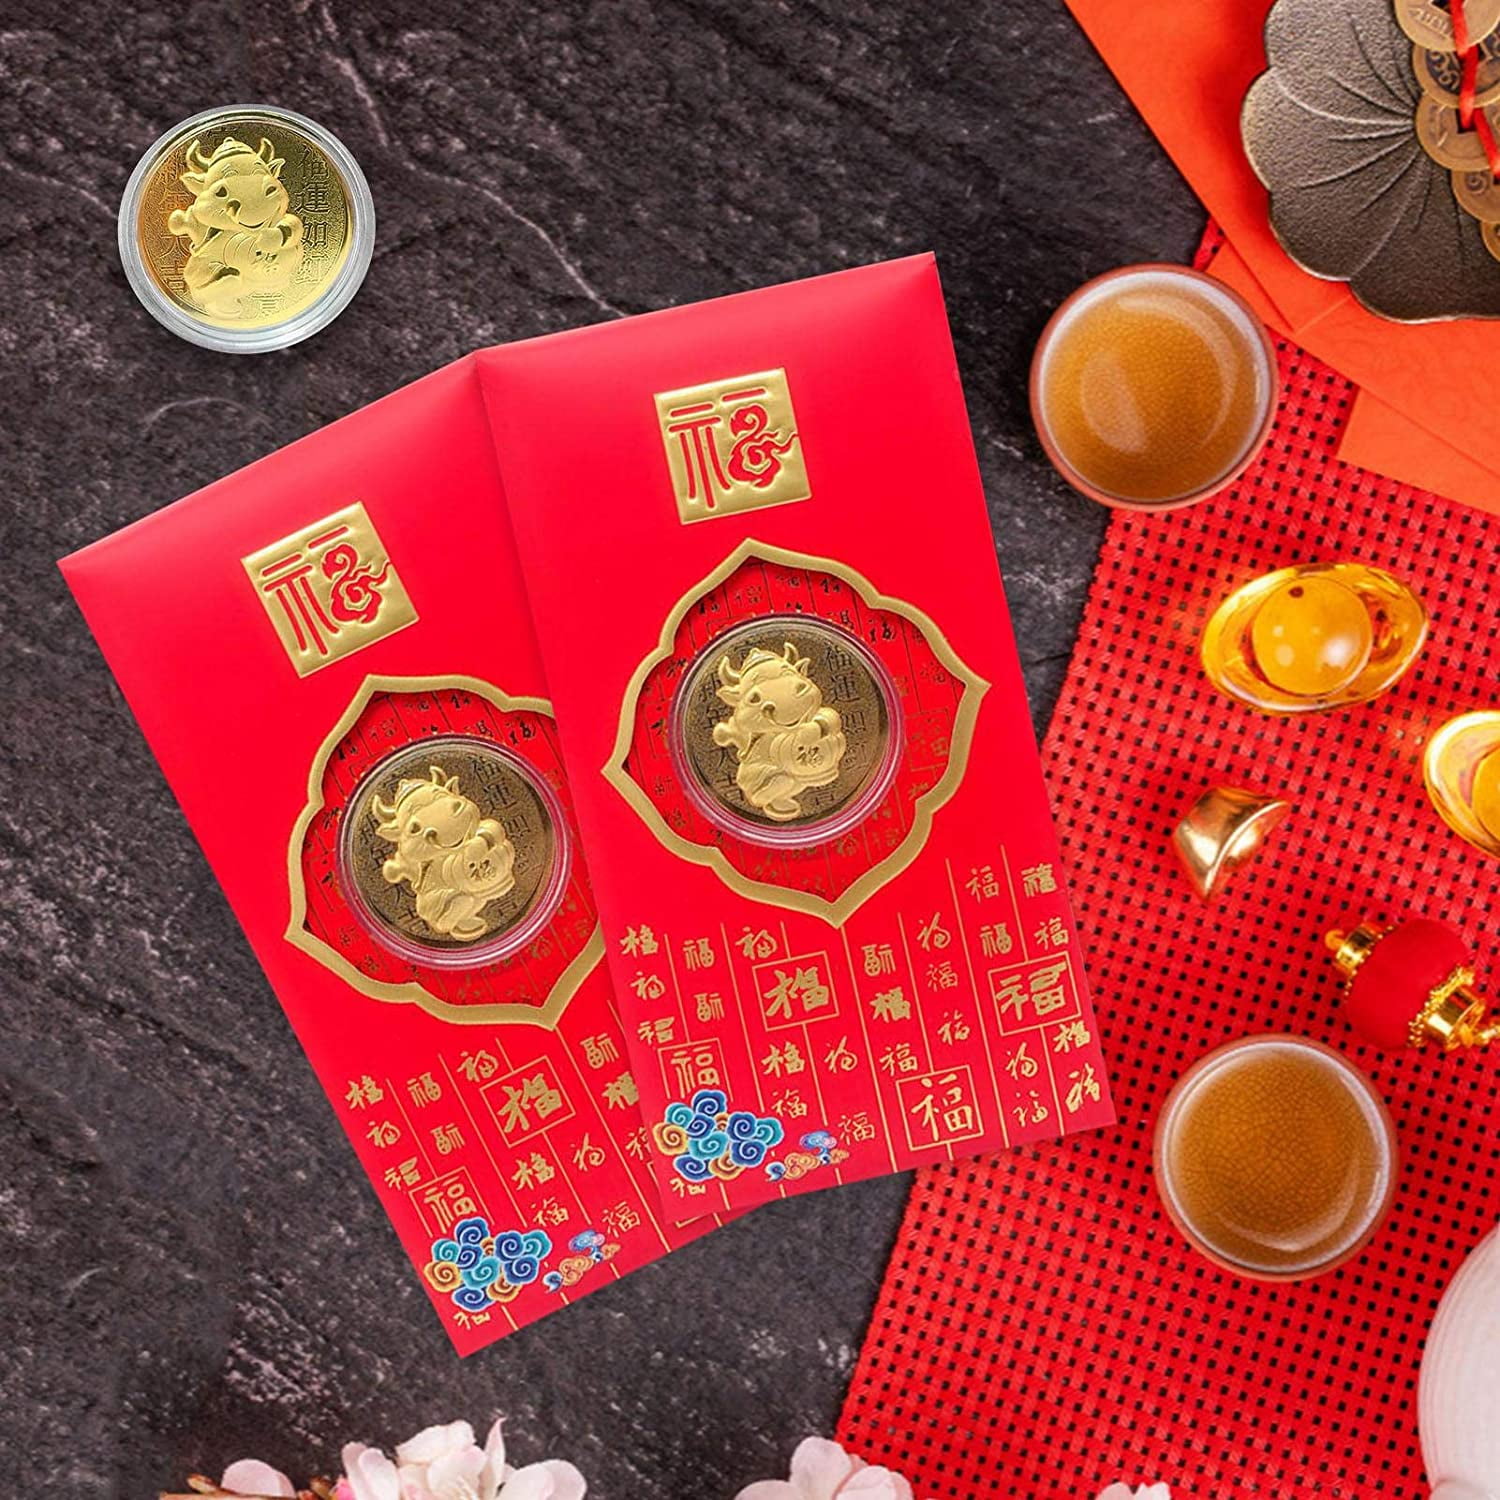 Details about   2021 Year Of The Ox Lucky Gold Coin Gold Foil Commemorative Coin Lucky Gold LW 